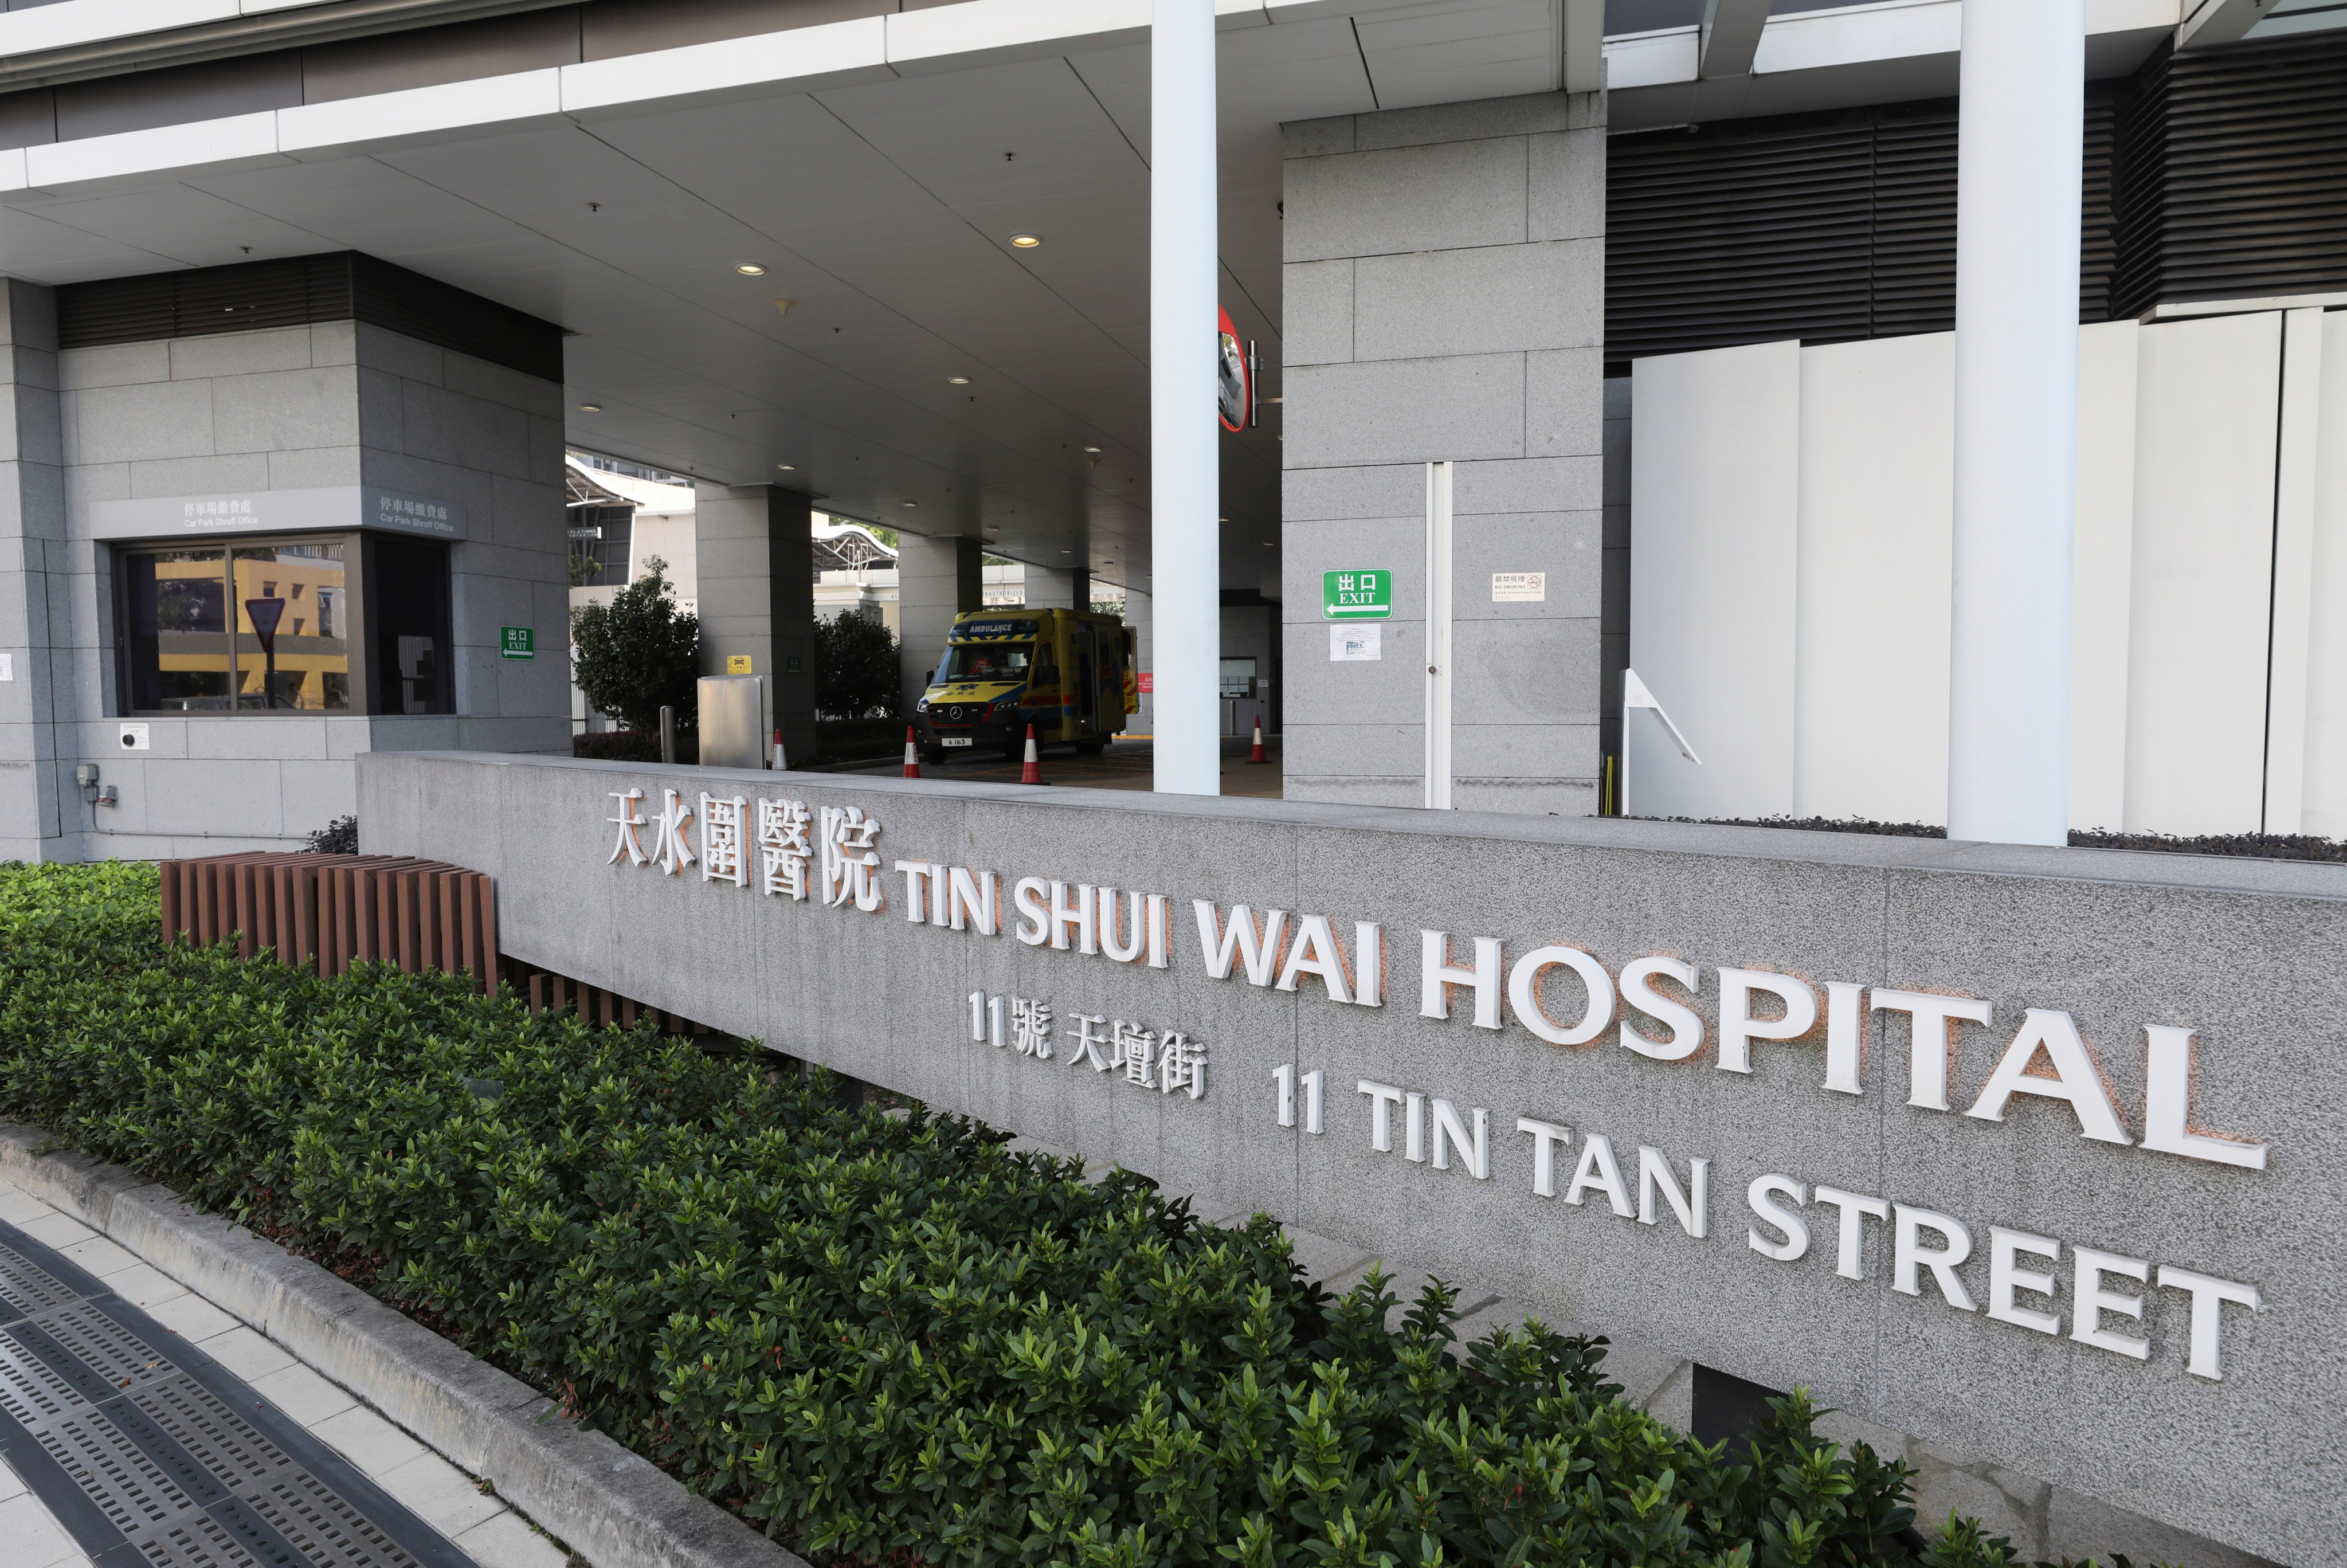 The victim was rushed to Tin Shui Wai Hospital before medical staff certified his death at 11.15am on Saturday. Photo: Sun Yeung